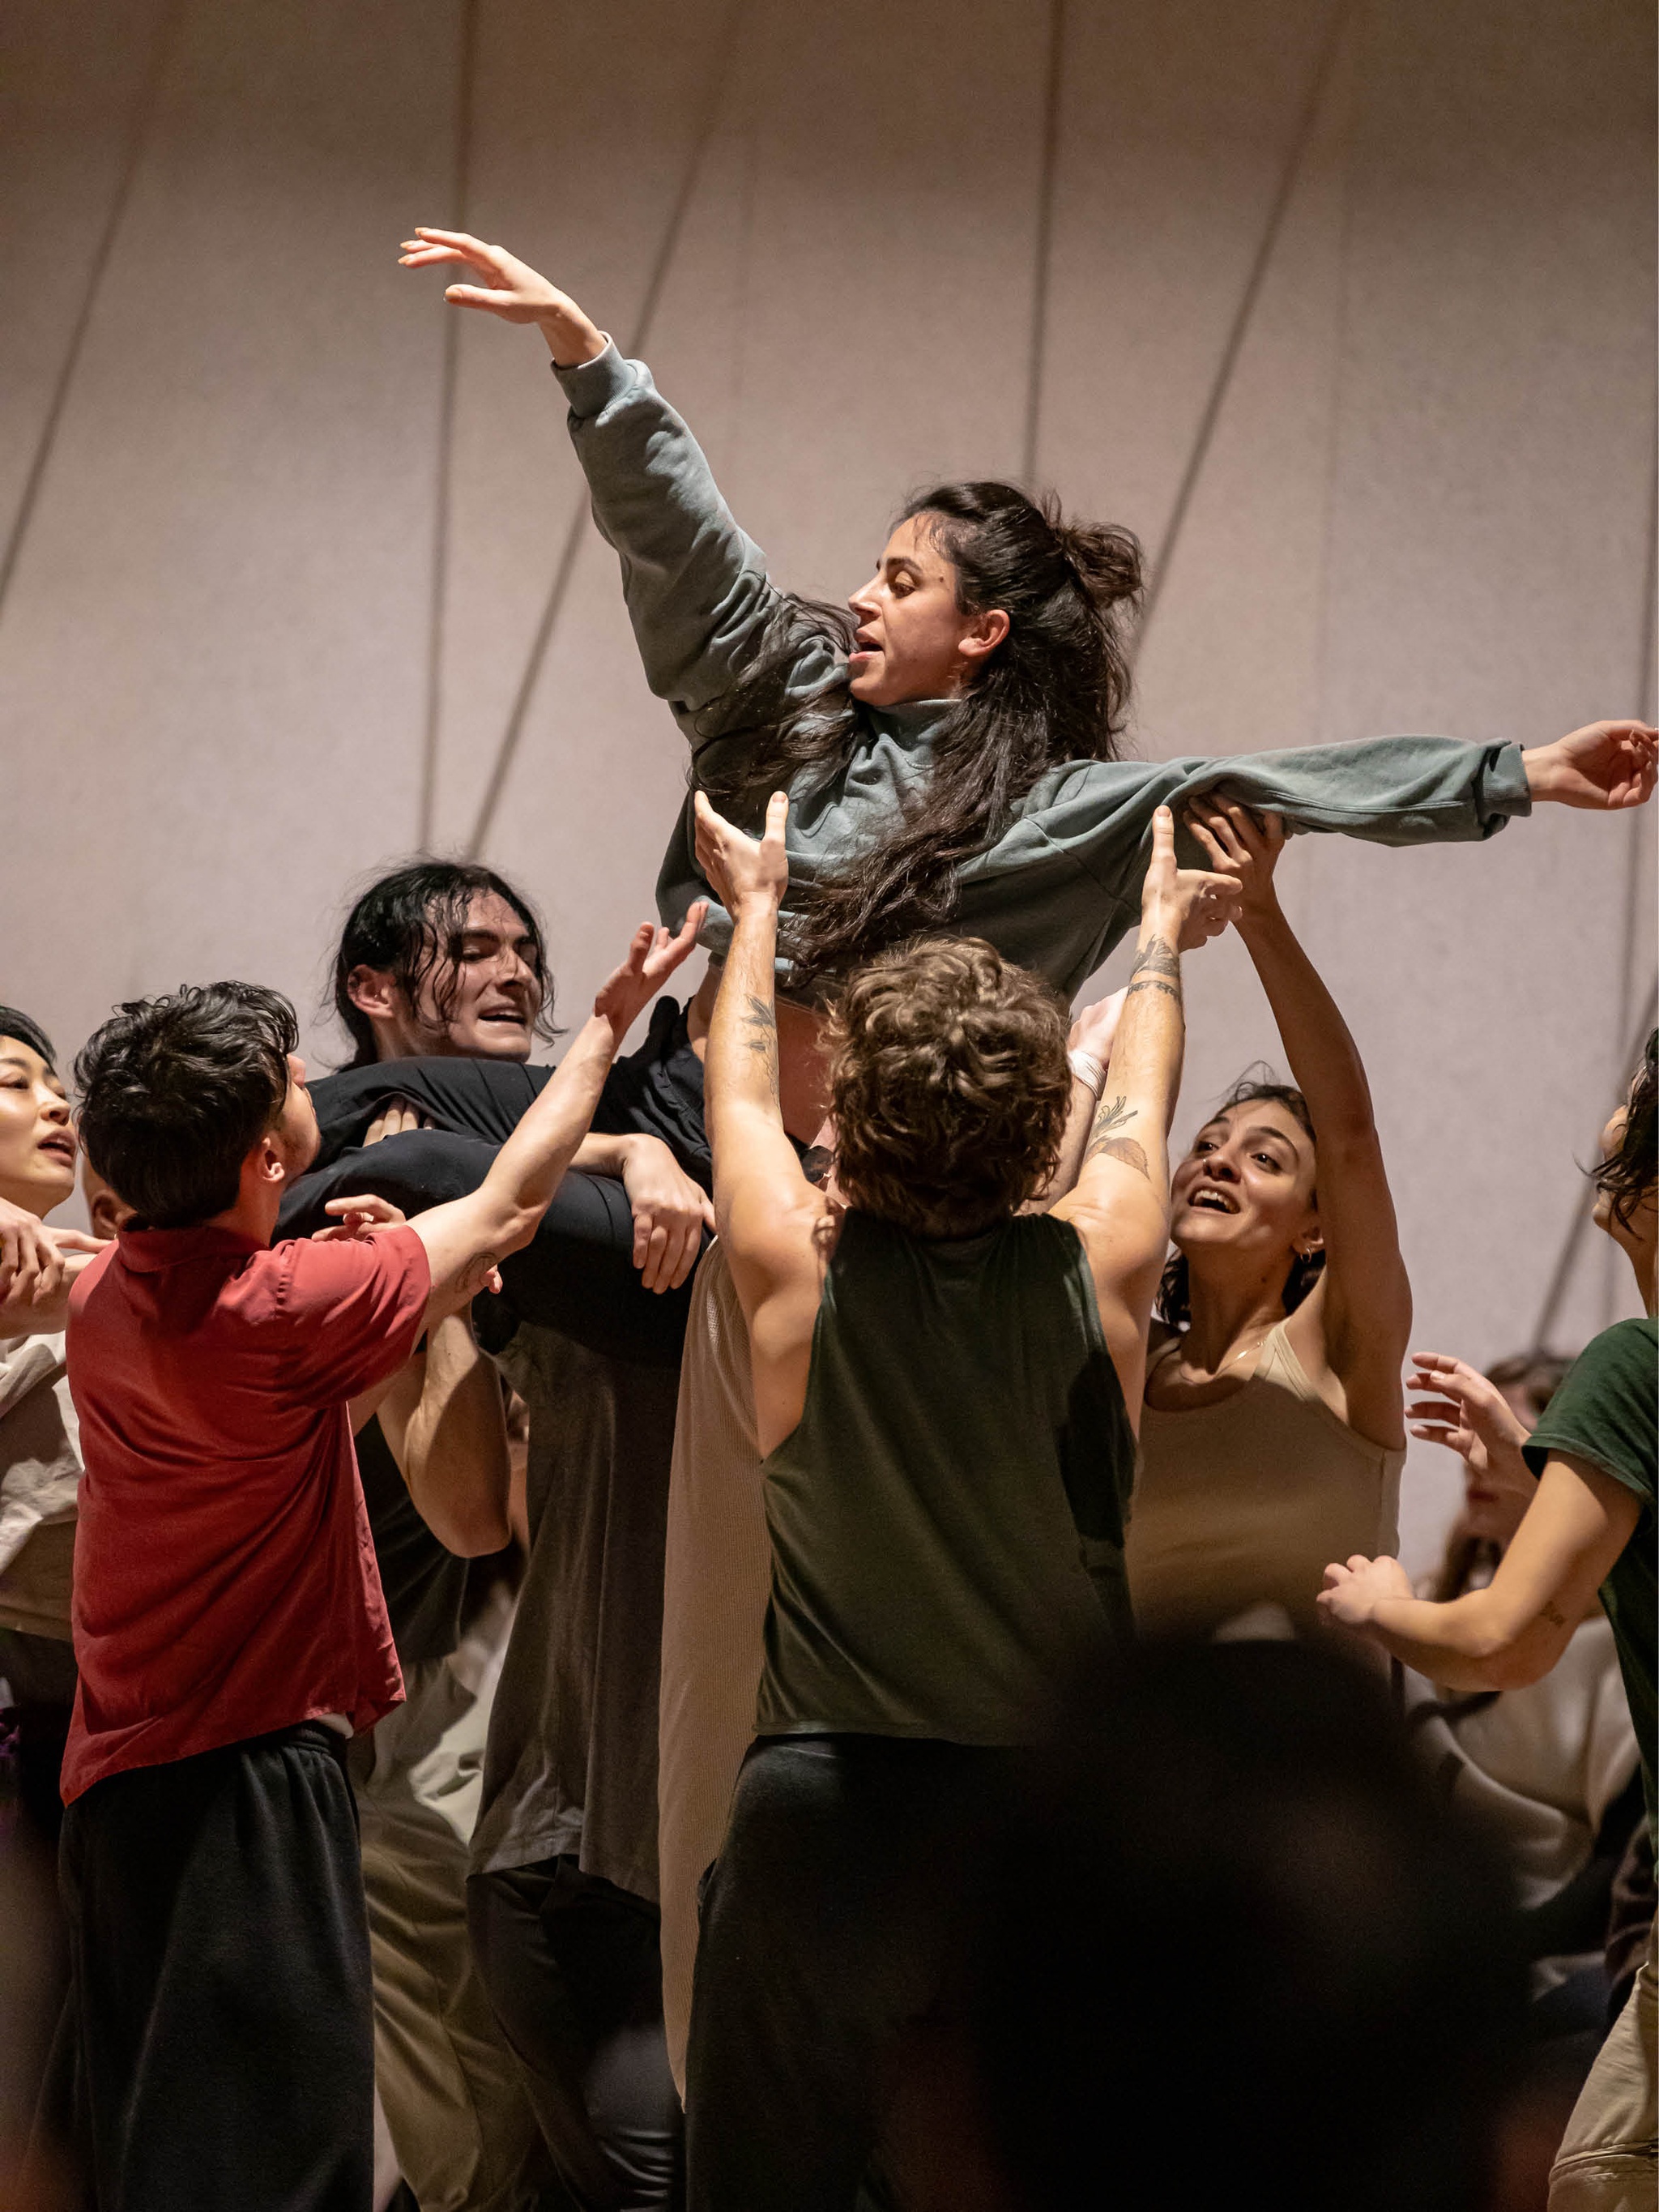 An ensemble of dancers lift another performer overhead. The dancer being held aloft wears a green sweatshirt and gray sweatpants with her arms outstretched exuberantly. She is smiling while the other performers support her.